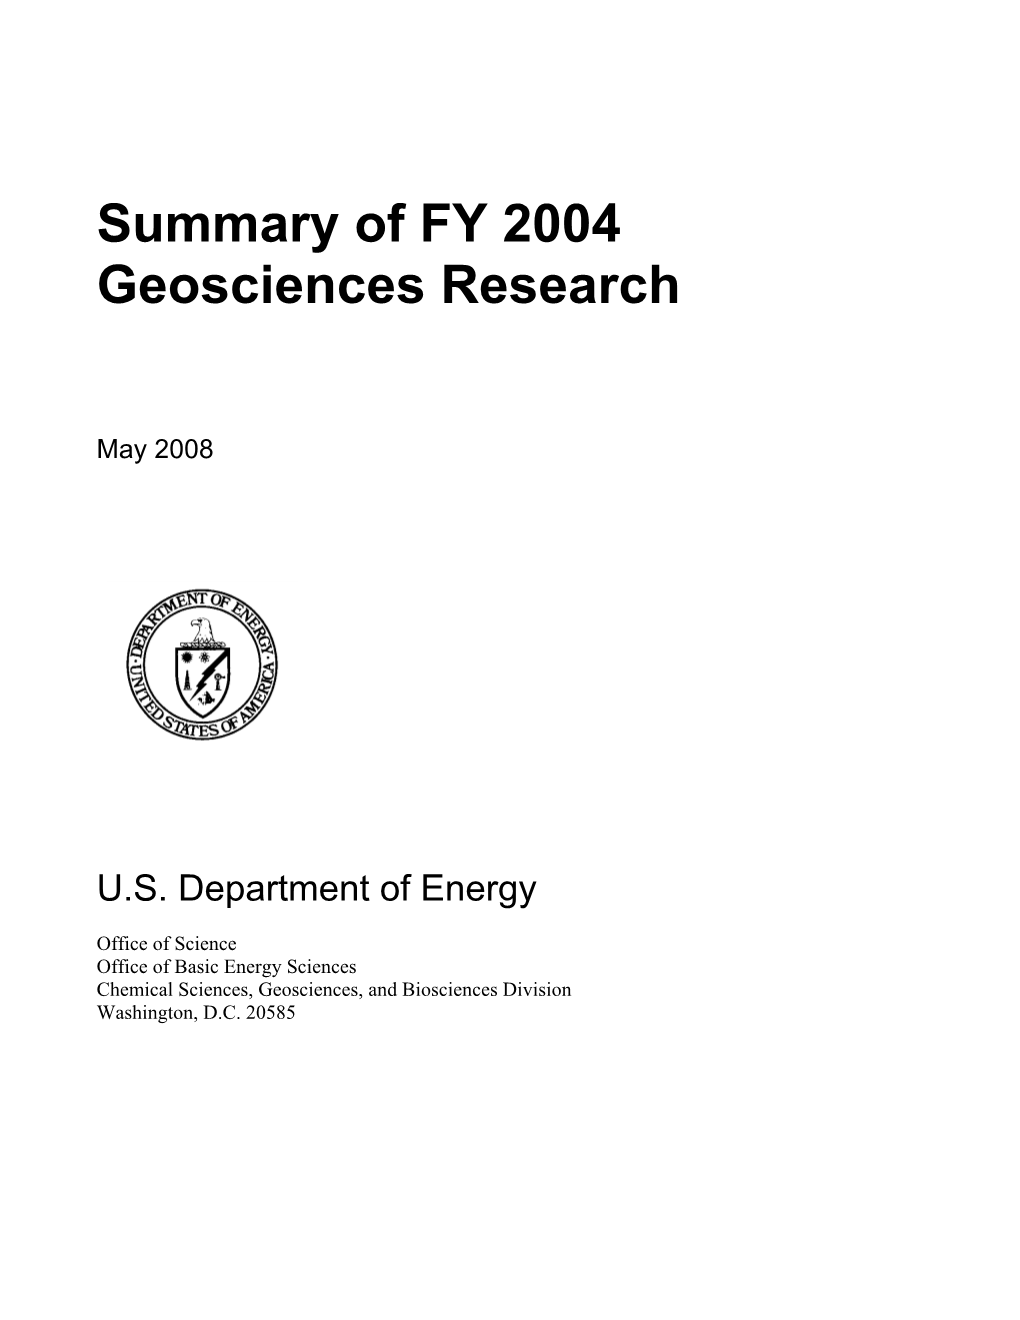 Summary of FY 2004 Geosciences Research